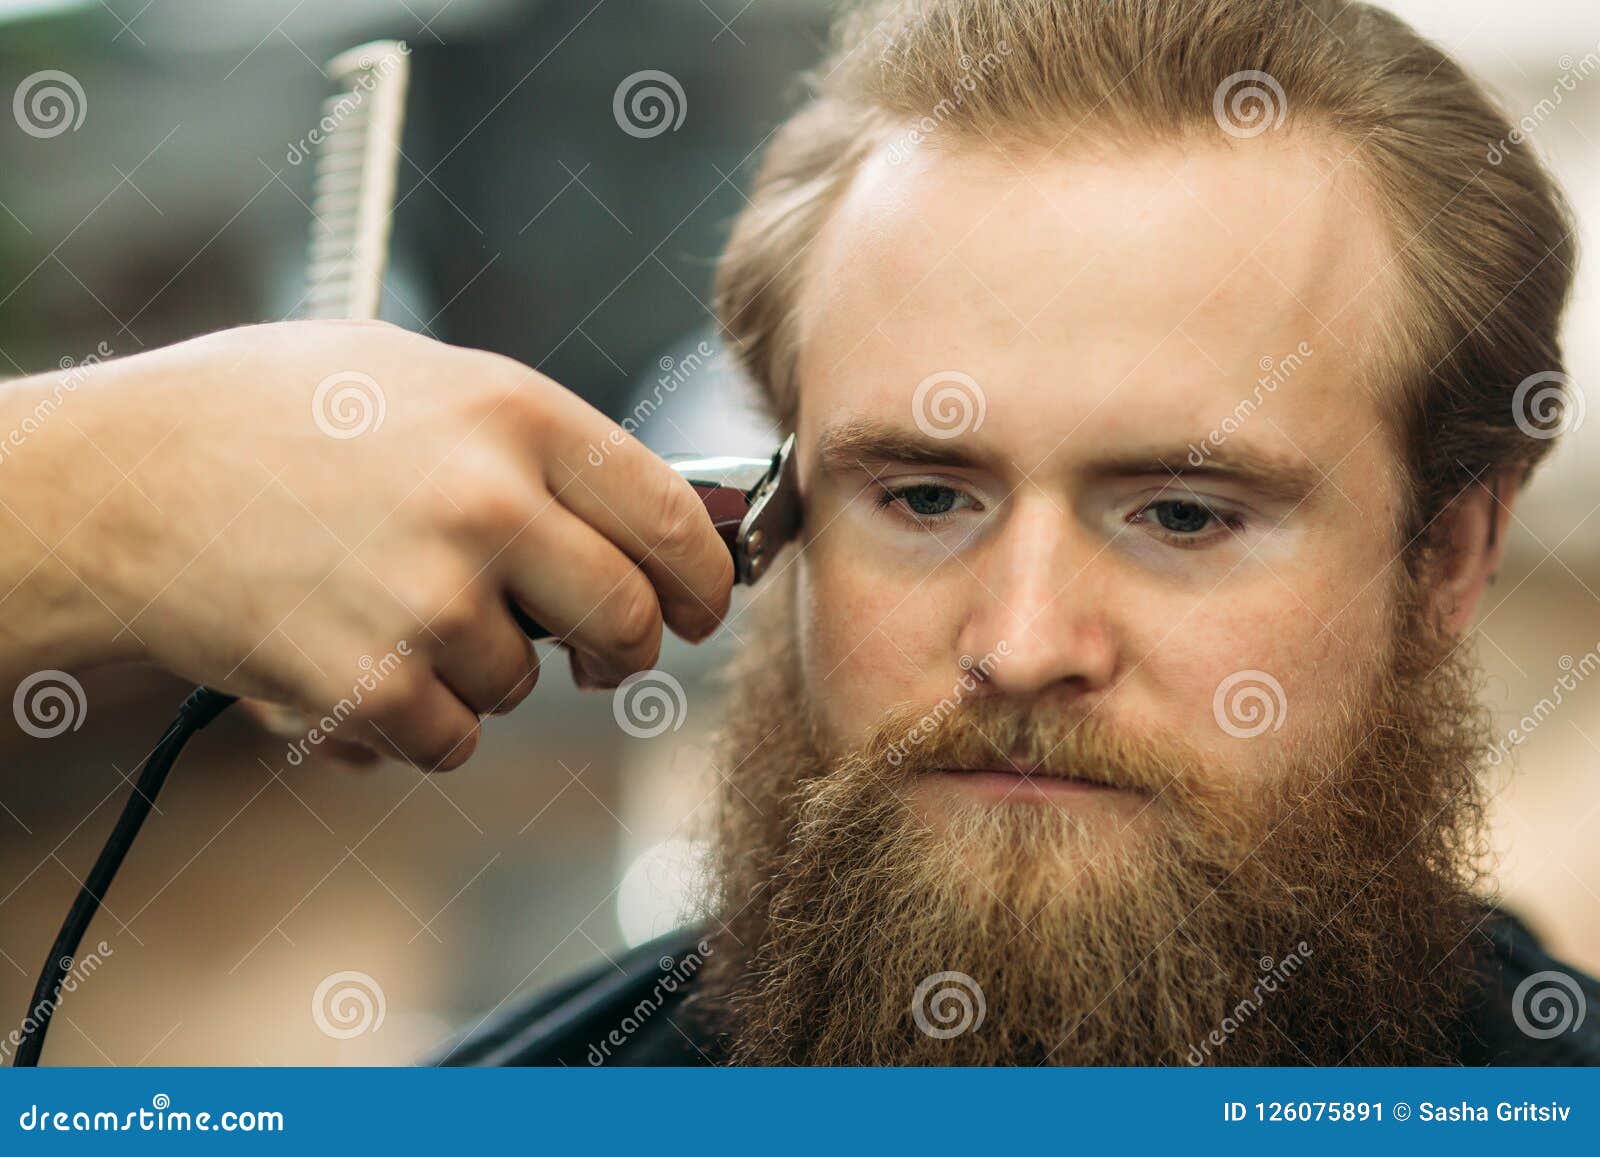 Bearded Man Having a Haircut with a Hair Clippers. Closeup View with  Shallow Depth of Field Stock Image - Image of design, modern: 126075891